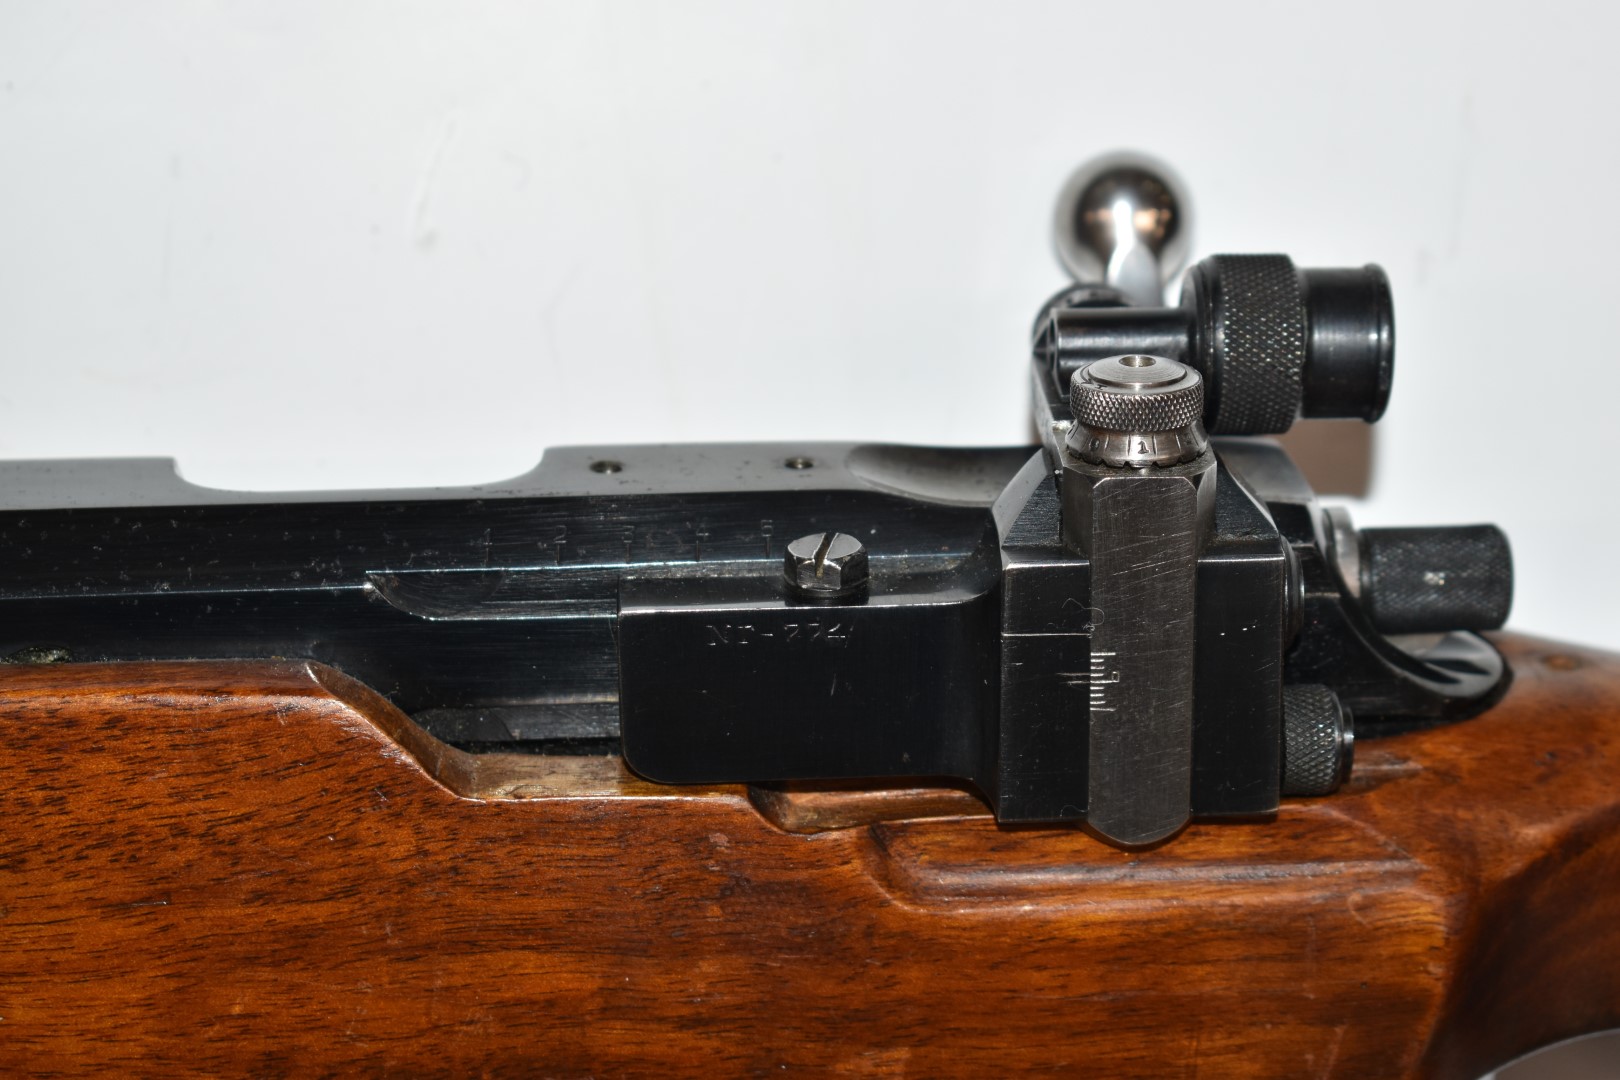 Vostok MU-12 .22 bolt-action target rifle with thumb hole grip, chequered forend, raised cheek - Image 11 of 15